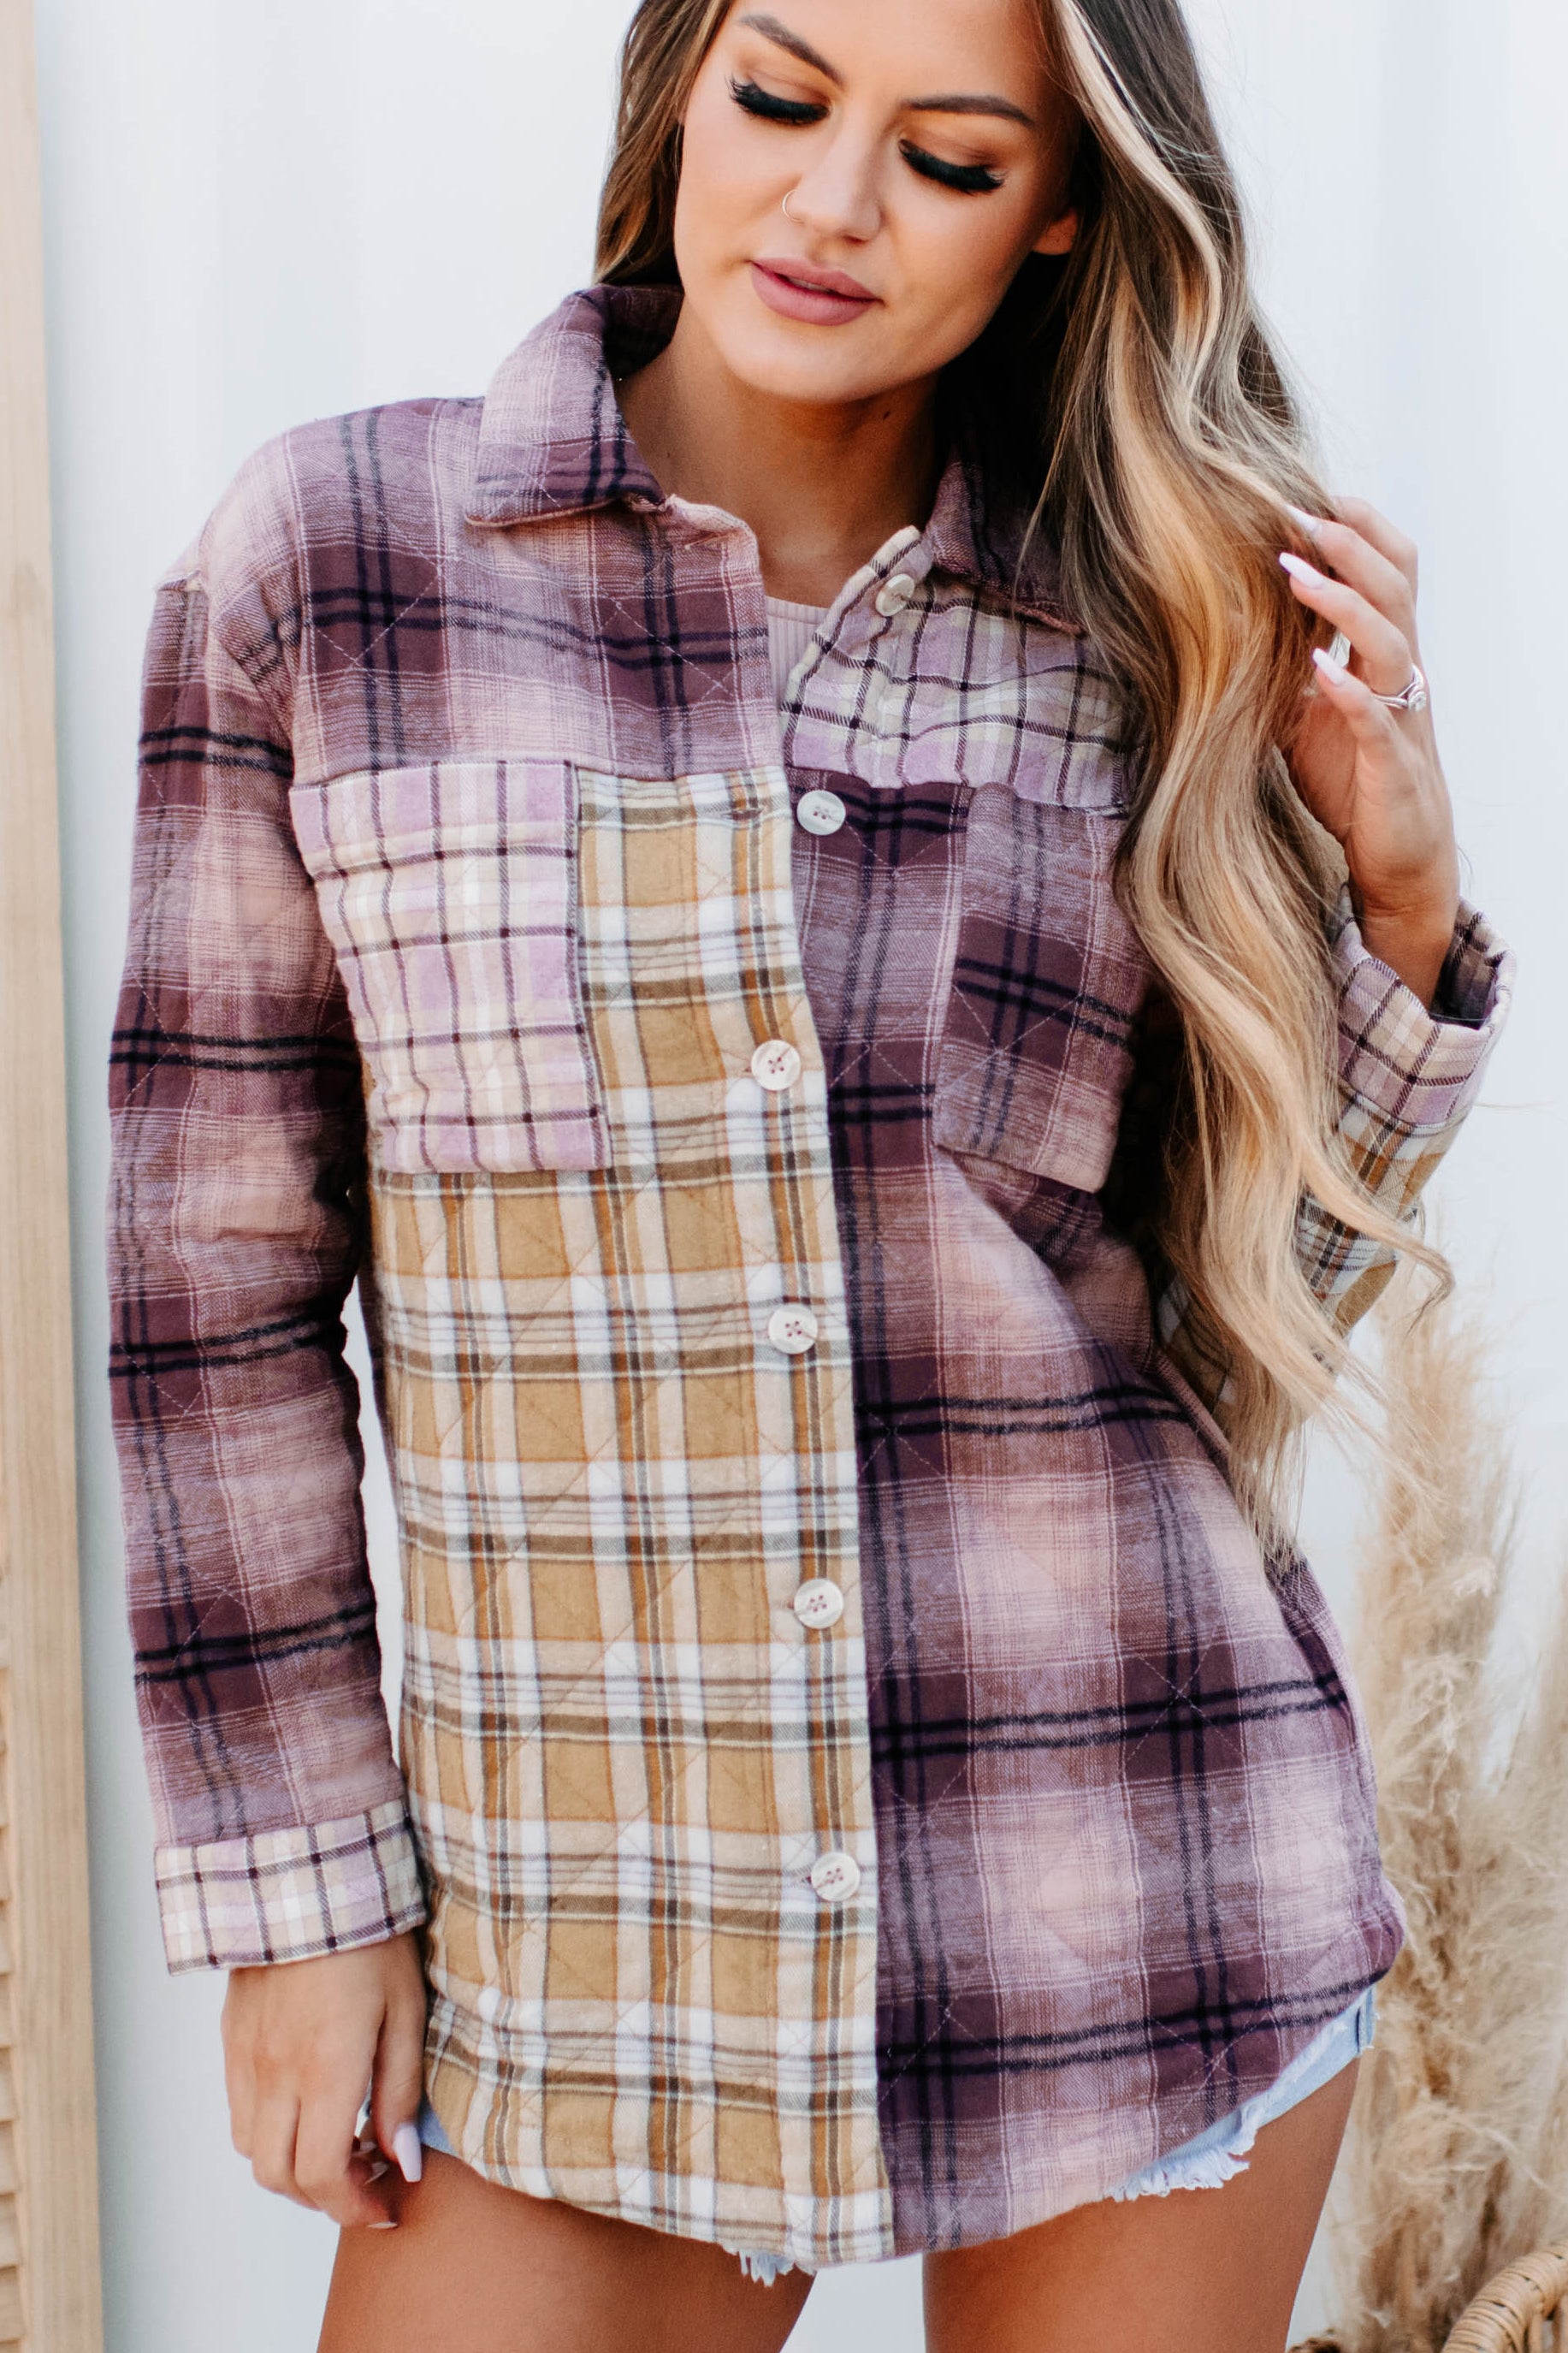 Just Up The Road Quilted Plaid Jacket (Mauve Multi) - NanaMacs